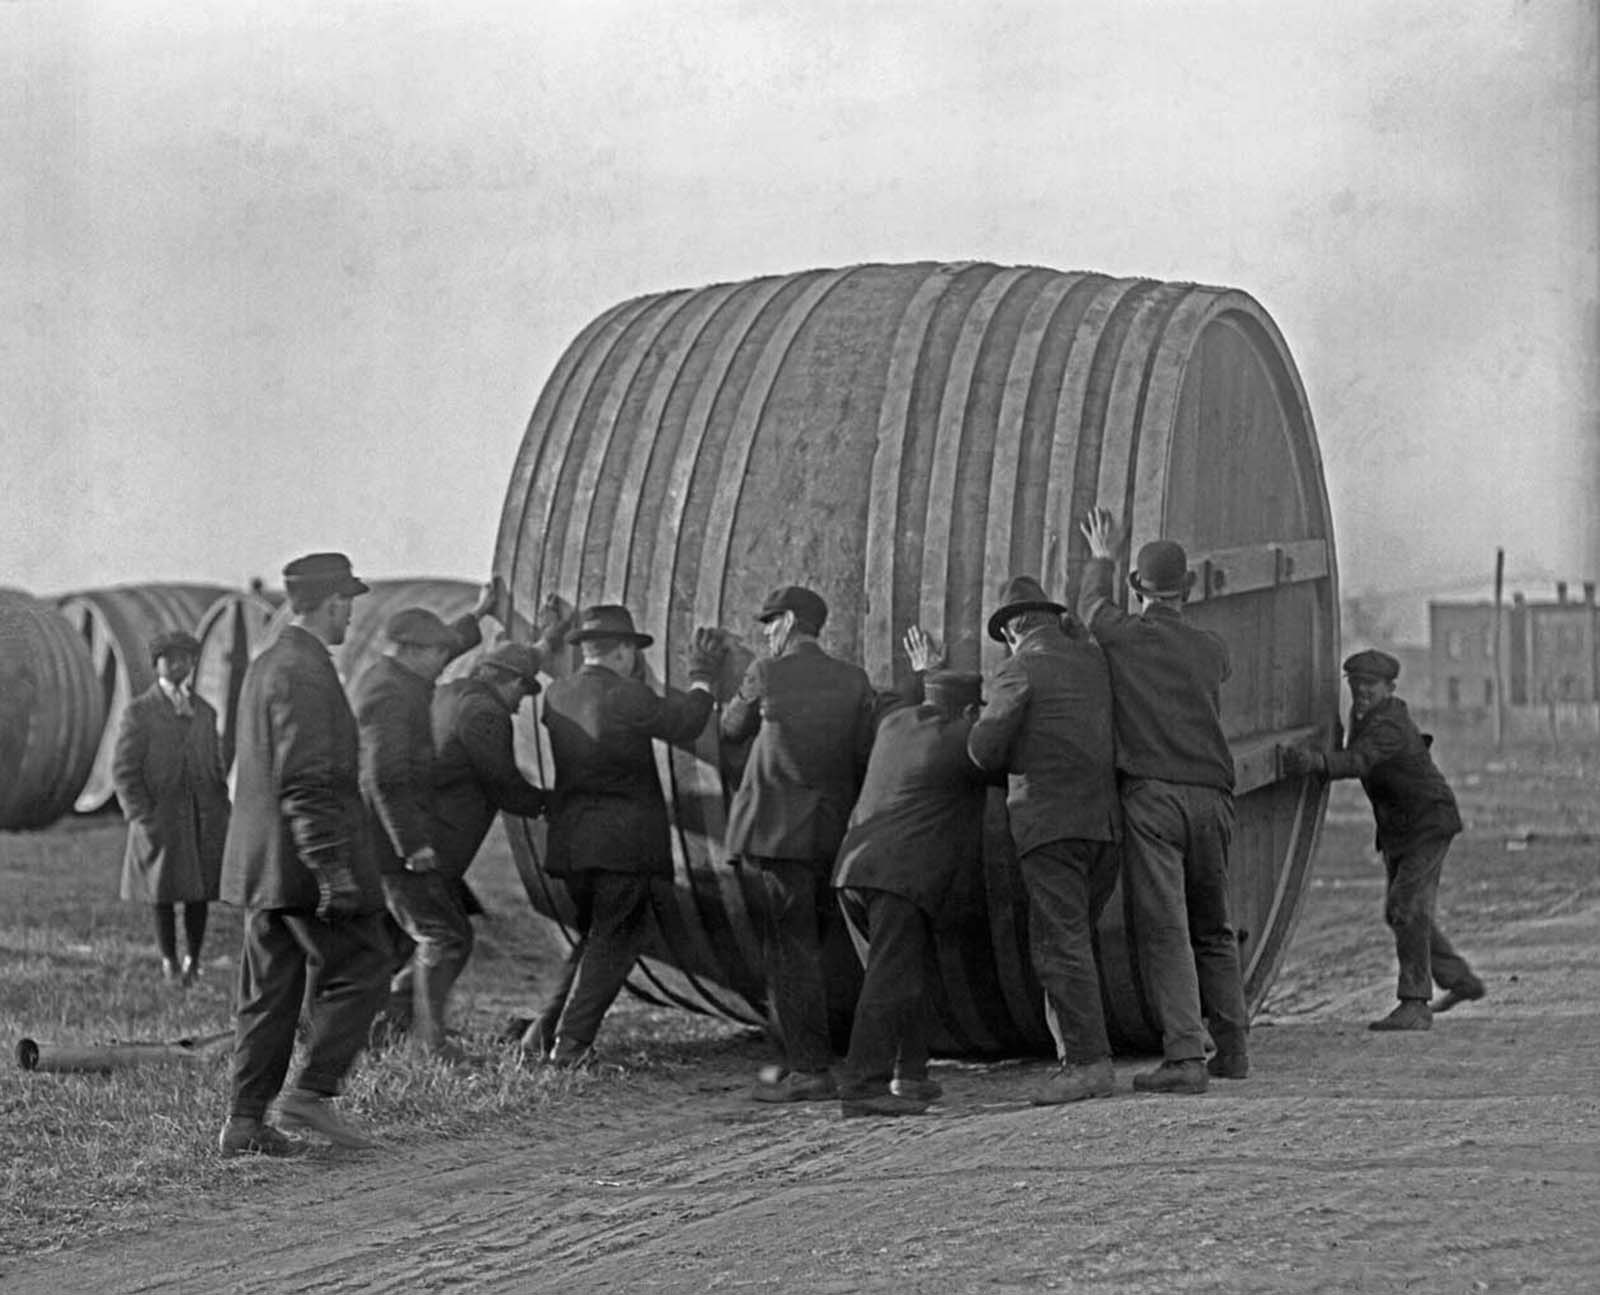 A brewery in Washington, DC, switches from brewing beer to making ice cream during Prohibition. Workers roll the giant beer vats out to make room for ice cream production equipment.